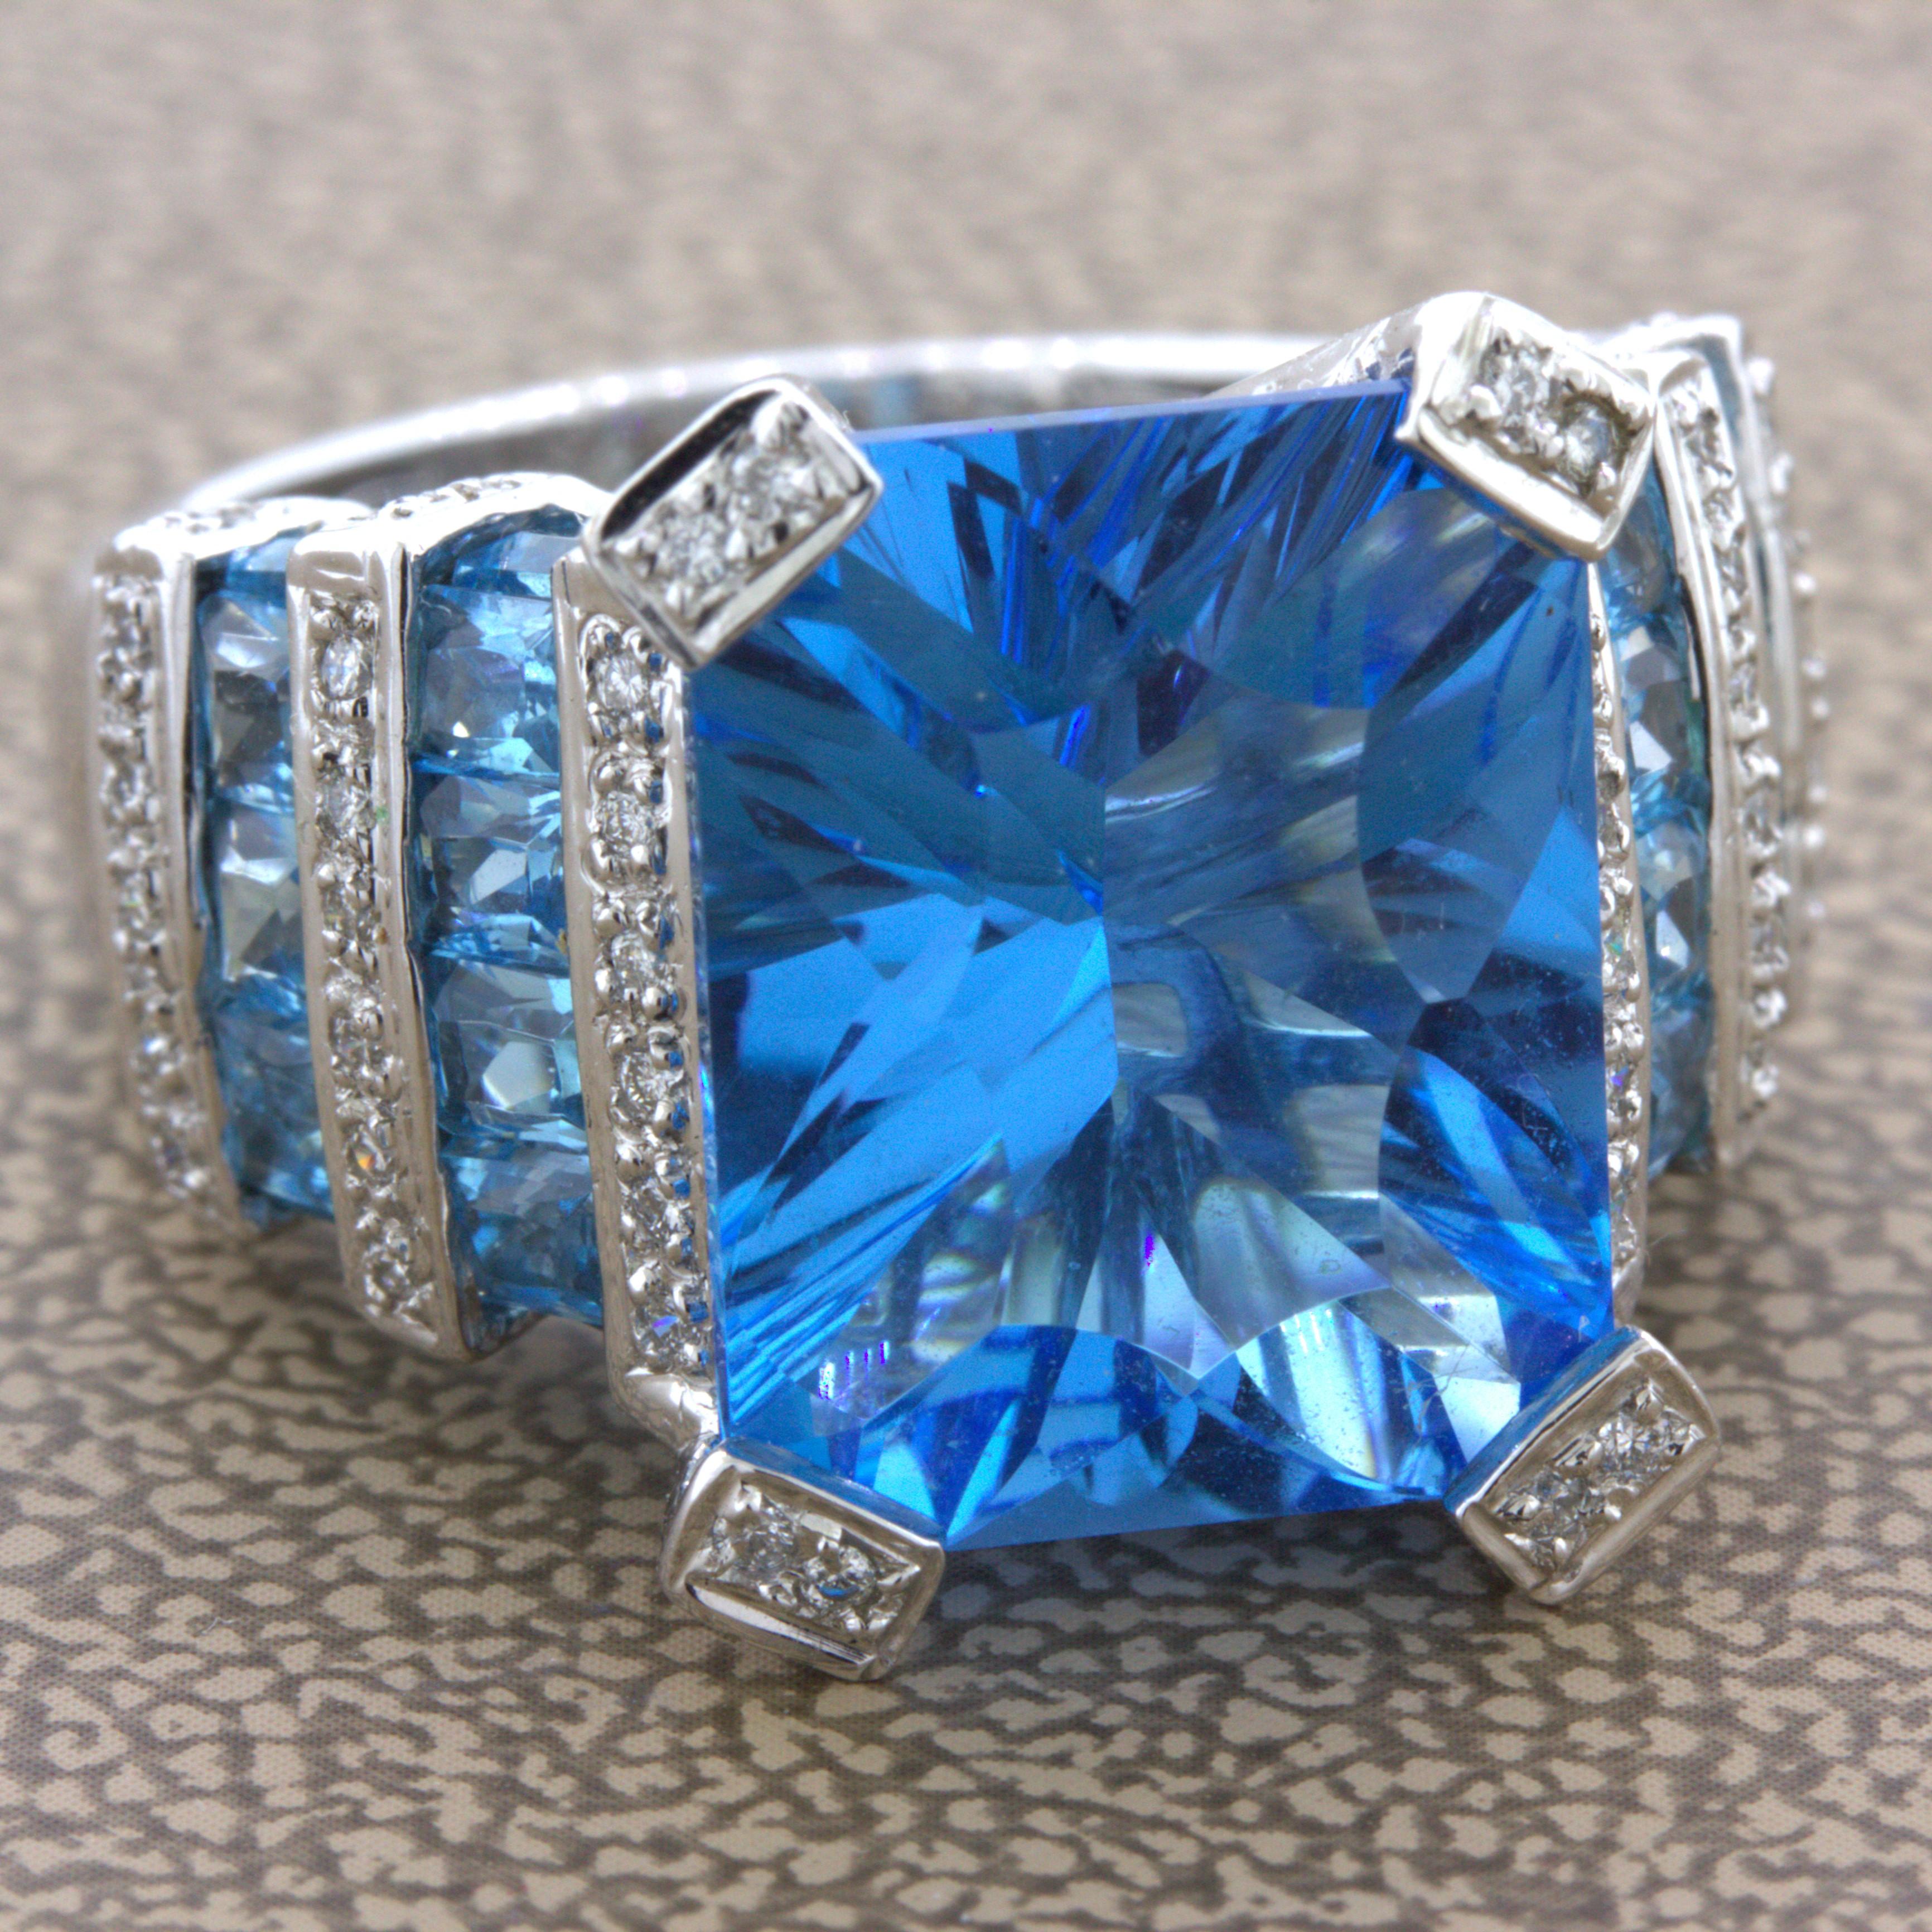 A beautiful original piece by designer Bellarri, this ring features a fantasy-cut blue topaz in its center. The topaz weighs over 10 carats and radiates brilliance and extra fire due to the unique fantasy cutting. It is complemented by 0.20 carats